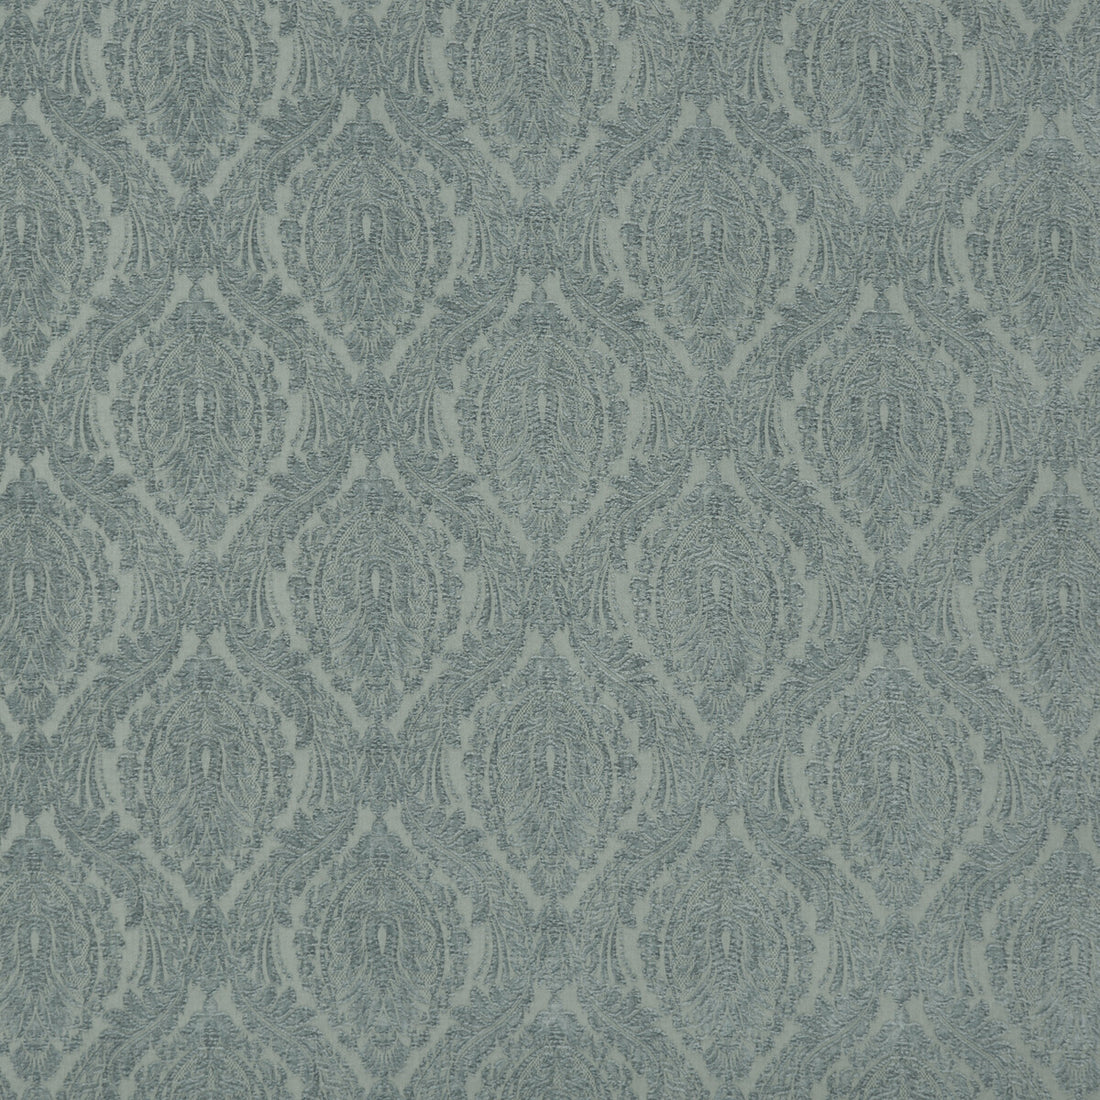 Pentire fabric in teal color - pattern BF10569.615.0 - by G P &amp; J Baker in the Artisan collection